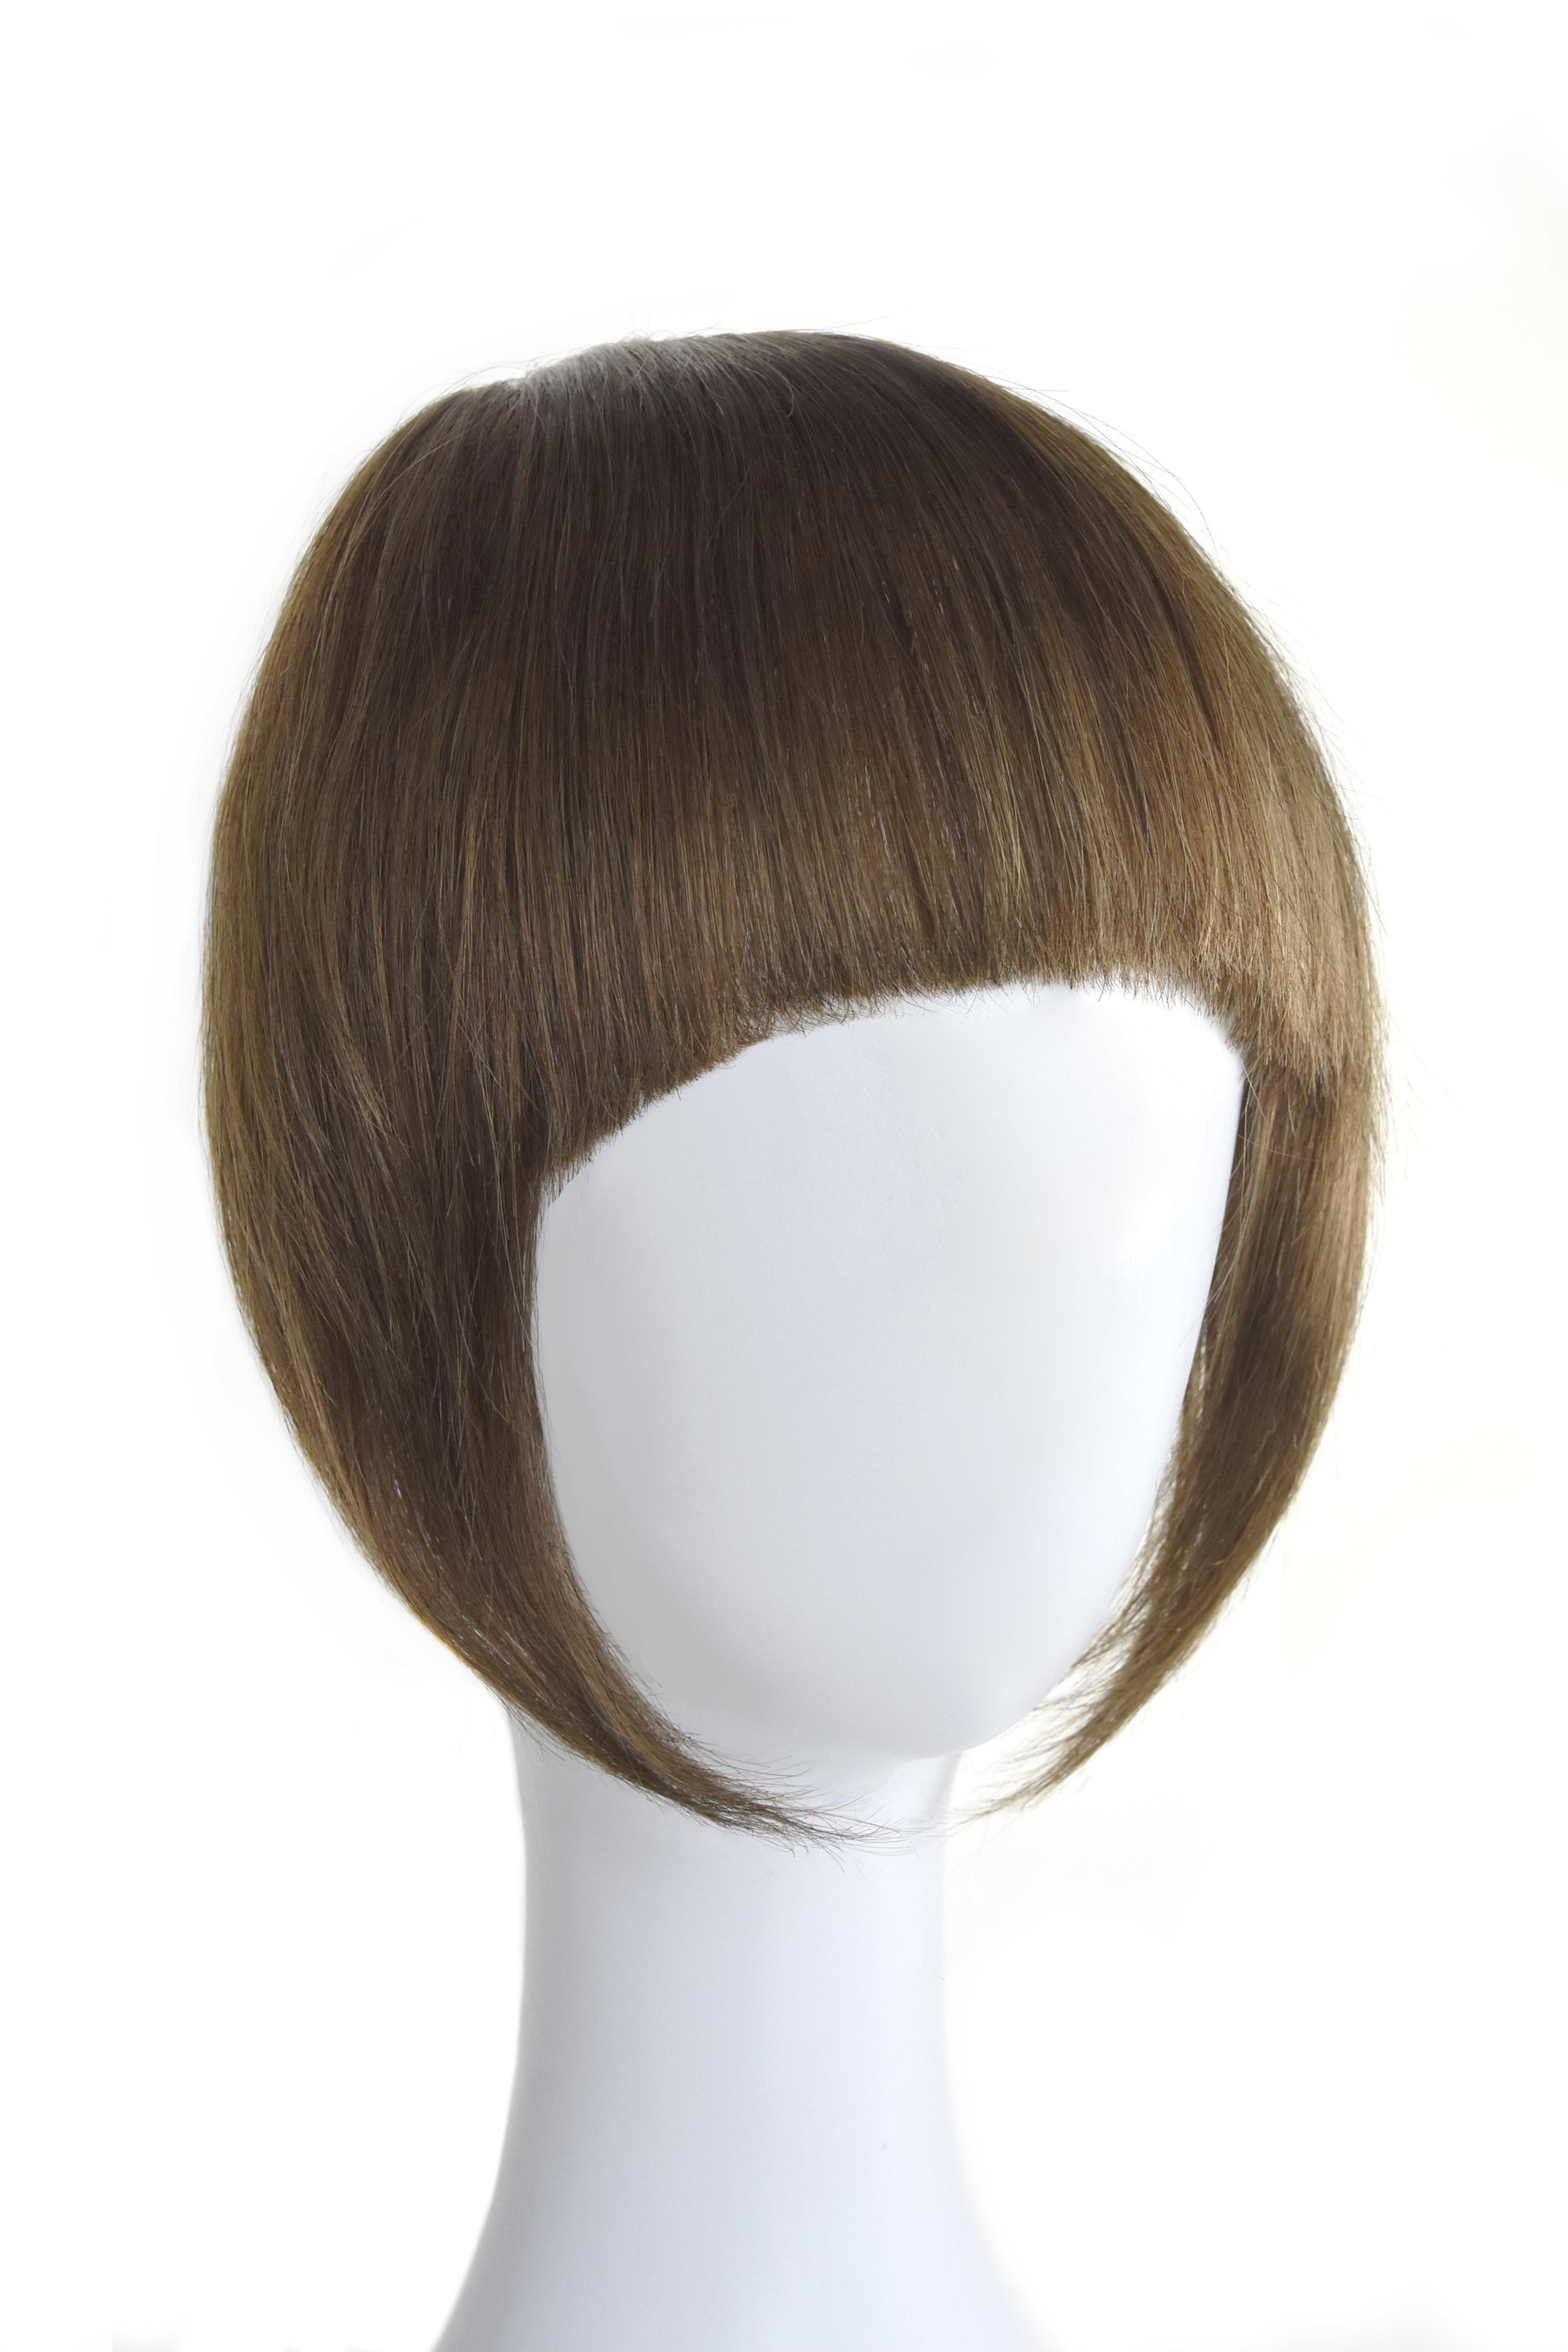 clip in fringe by Cliphair US 100% real human hair